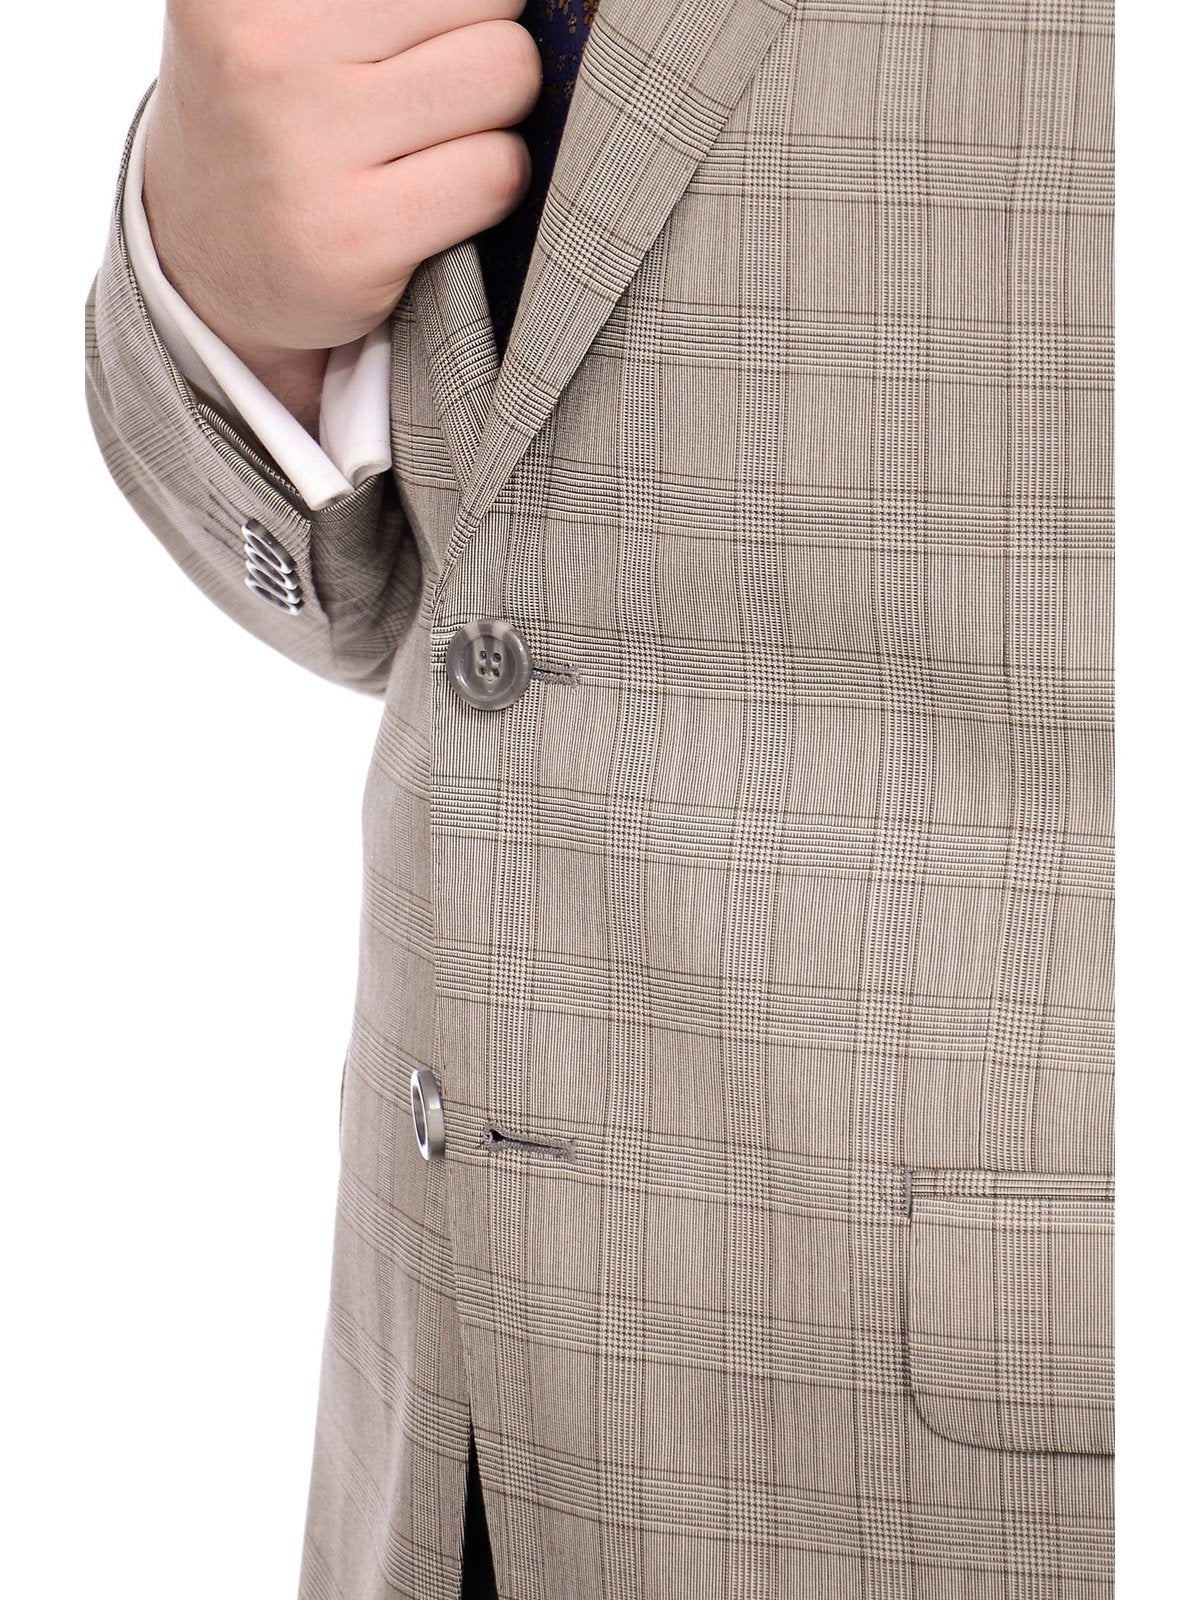 Napoli TWO PIECE SUITS Napoli Slim Fit Light Brown Glen Plaid Half Canvassed Marzotto Wool Suit